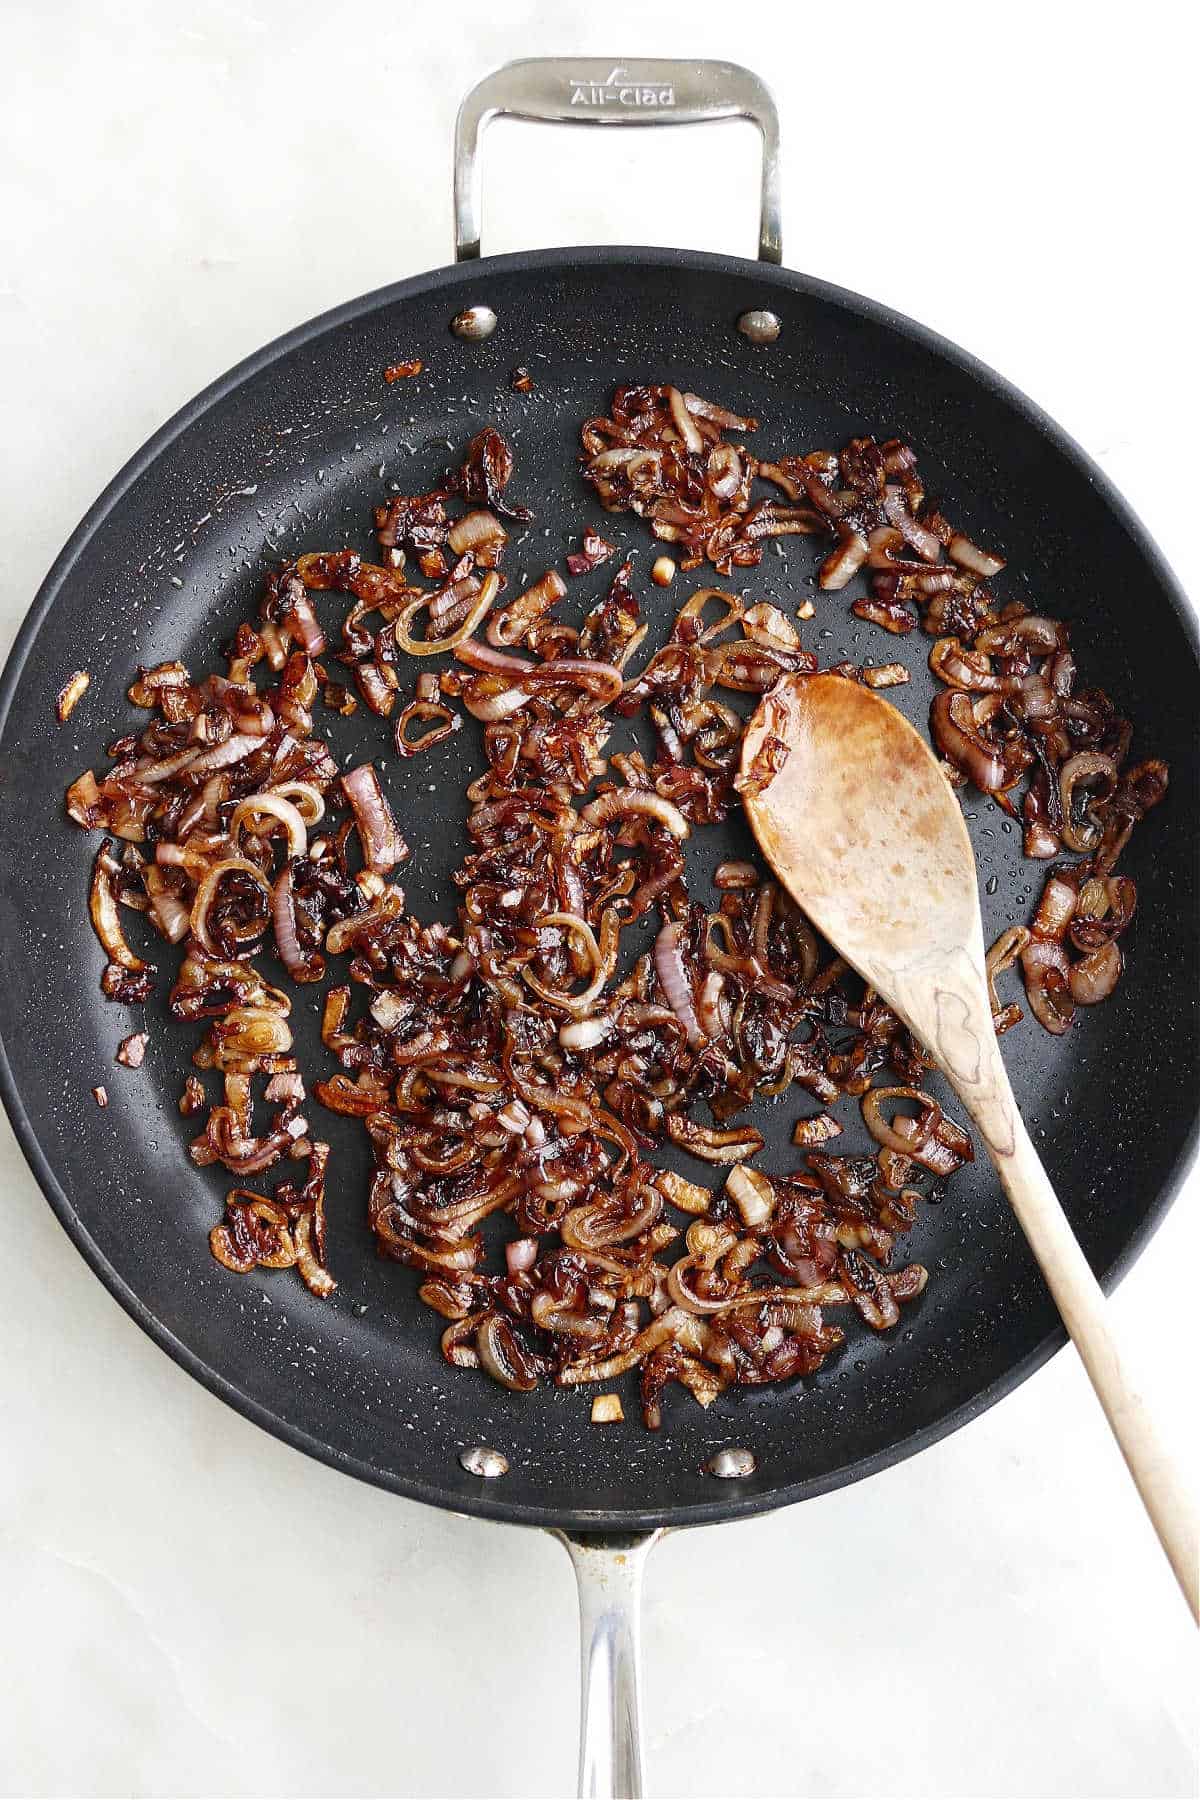 balsamic caramelized shallots in a large black skillet with a wooden spoon